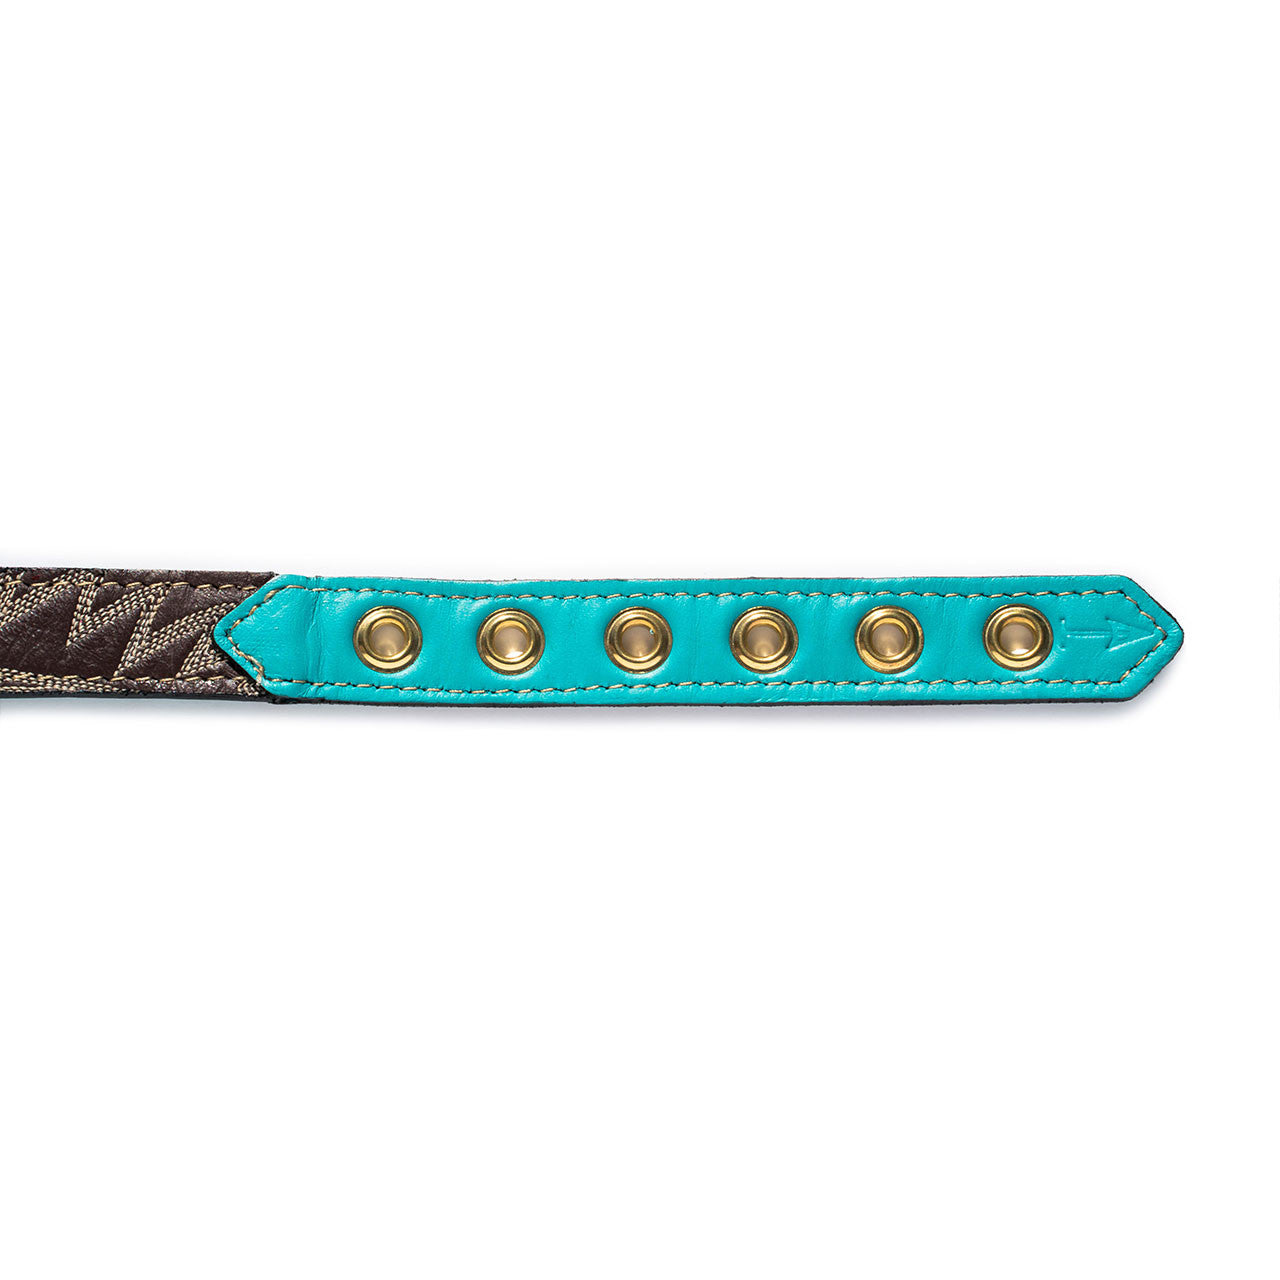 Turquoise Dog Collar with Chocolate Leather + Ivory Stitching